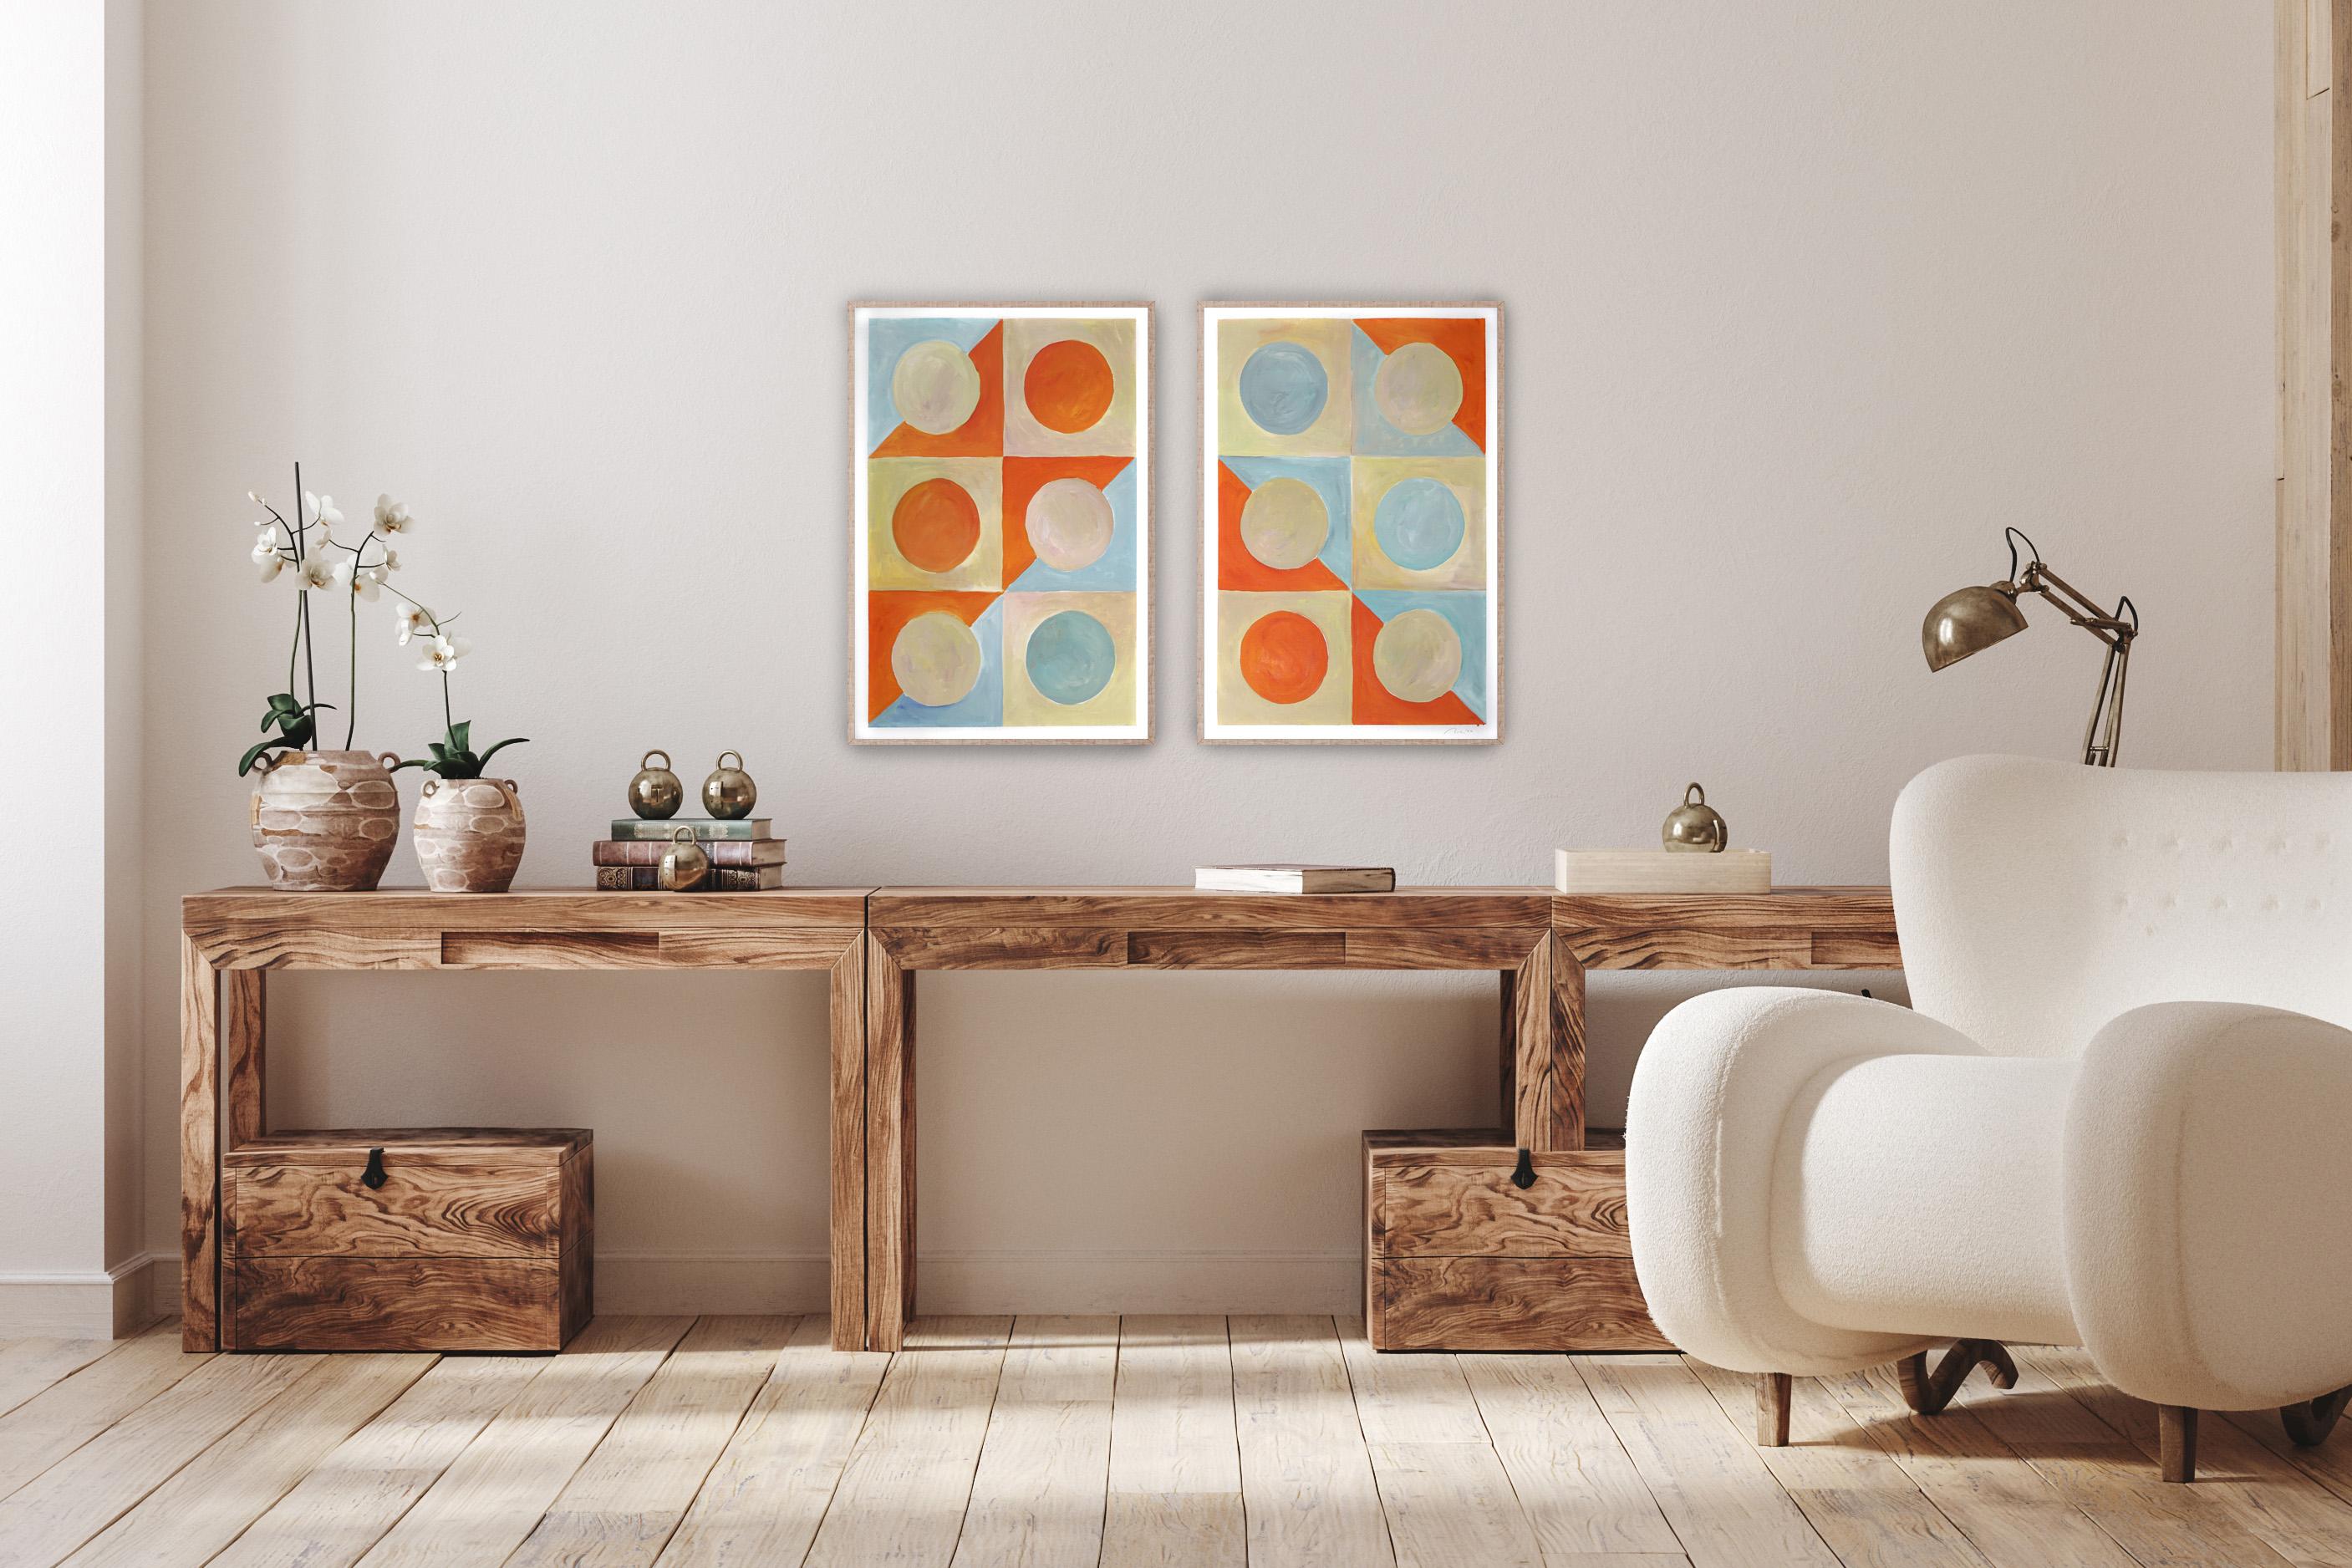 Yin Yang Golden Pattern Tiles, Orange and Turquoise Bauhaus Shapes Diptych, 2022 For Sale 2